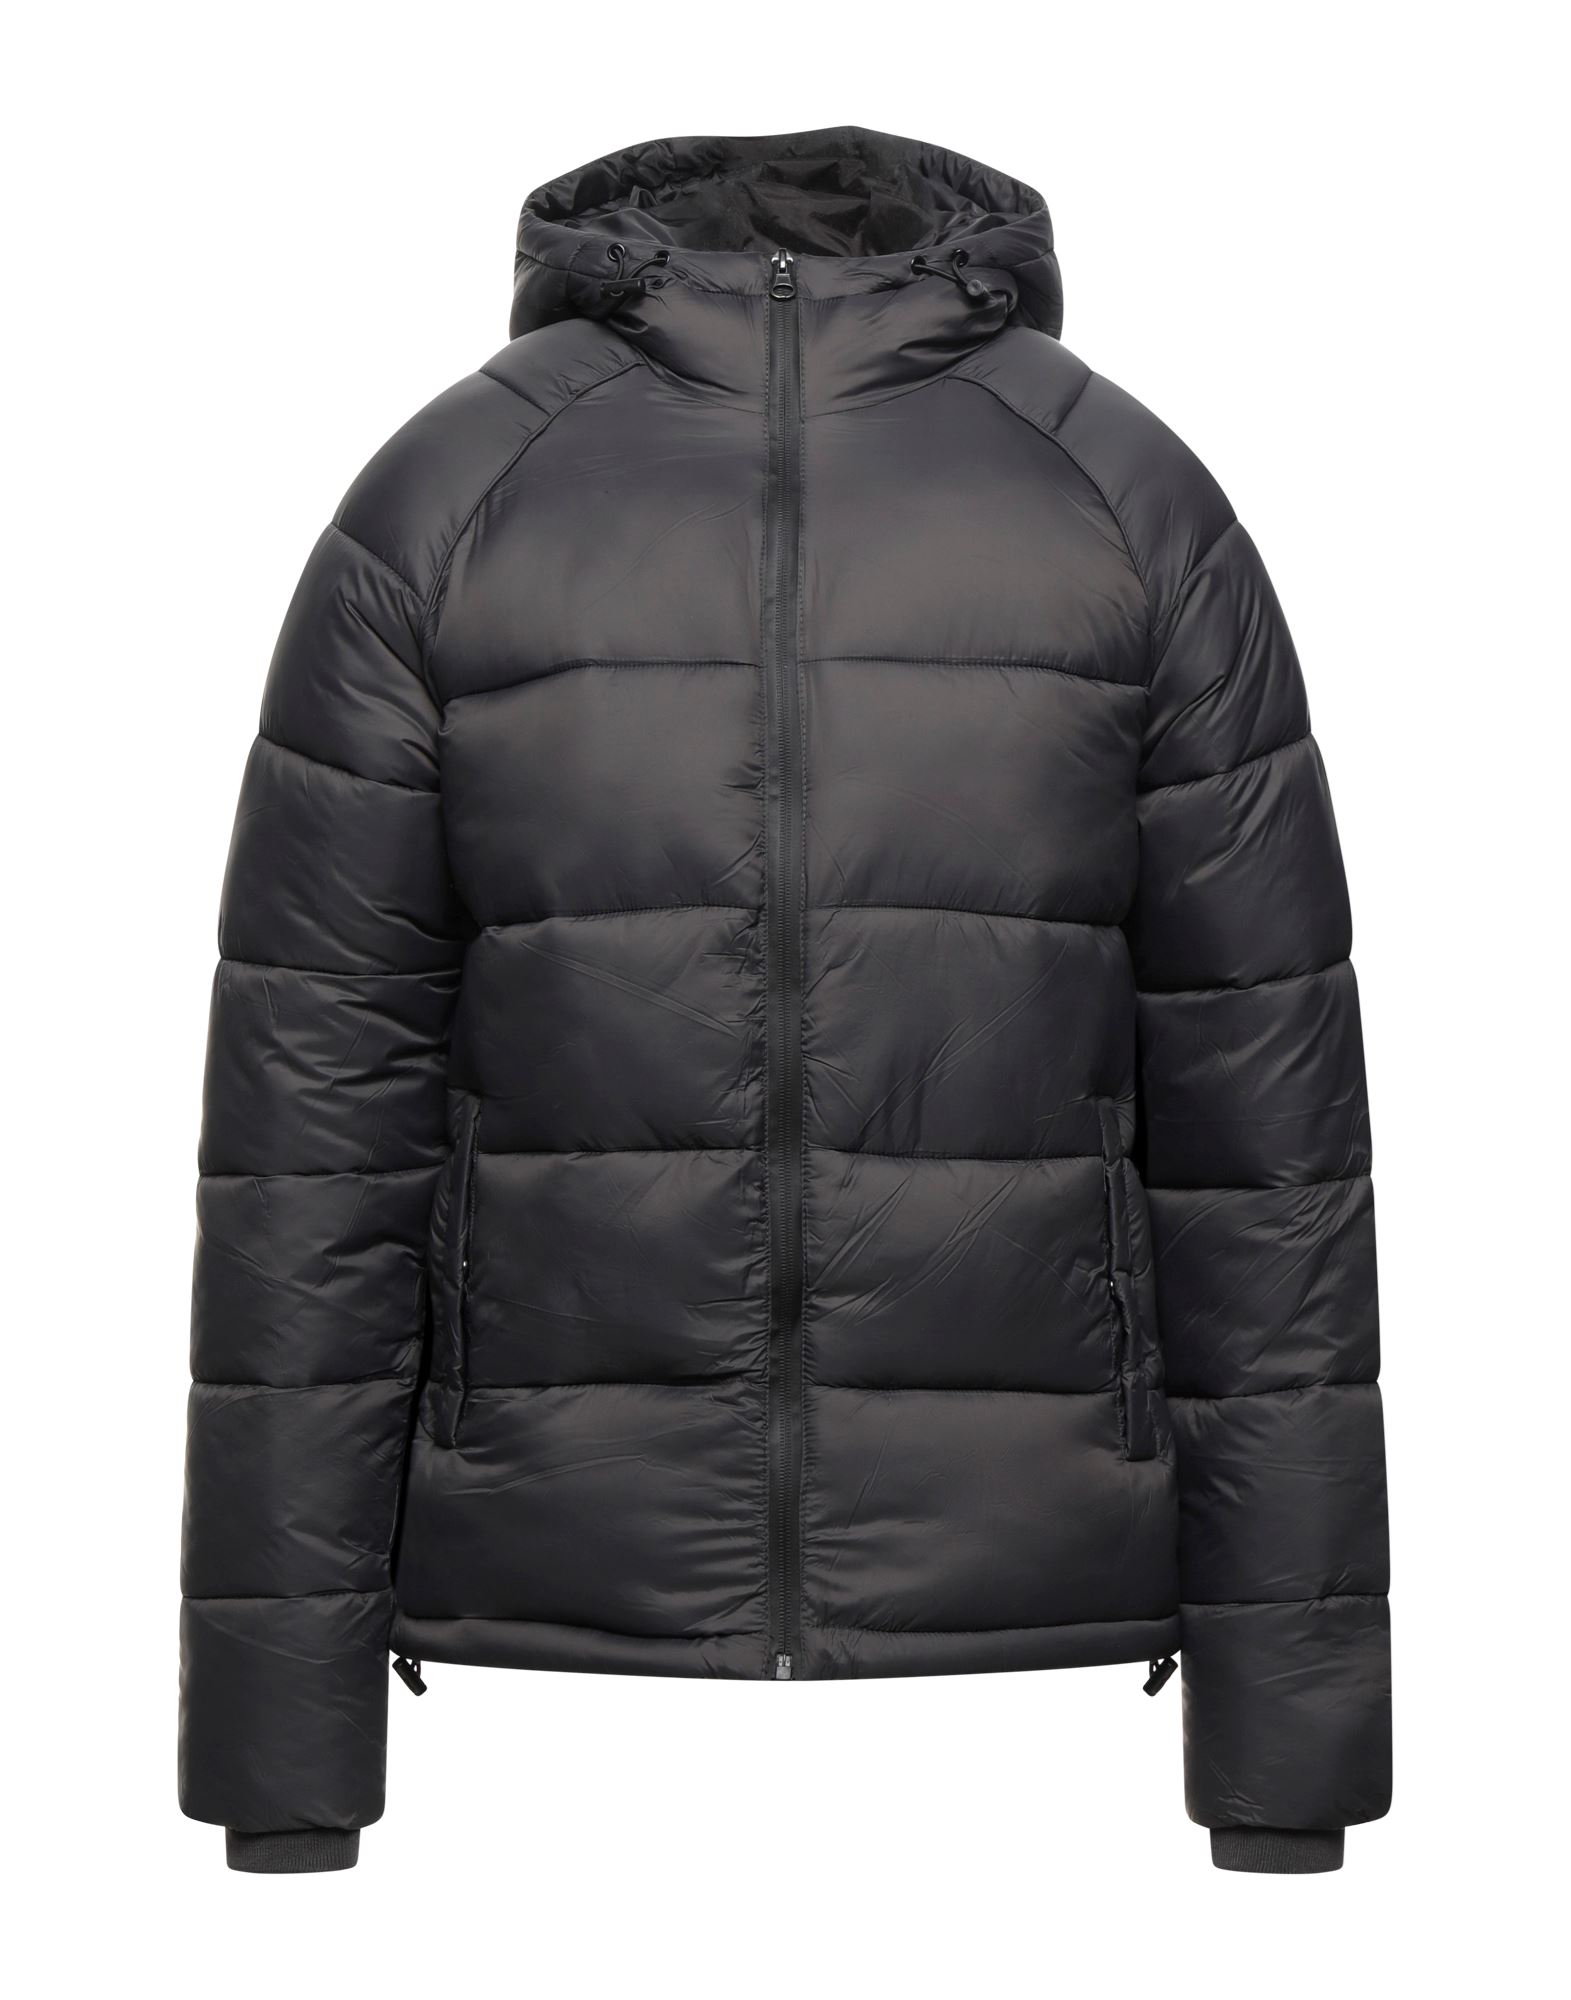 Adhoc Down Jackets In Lead